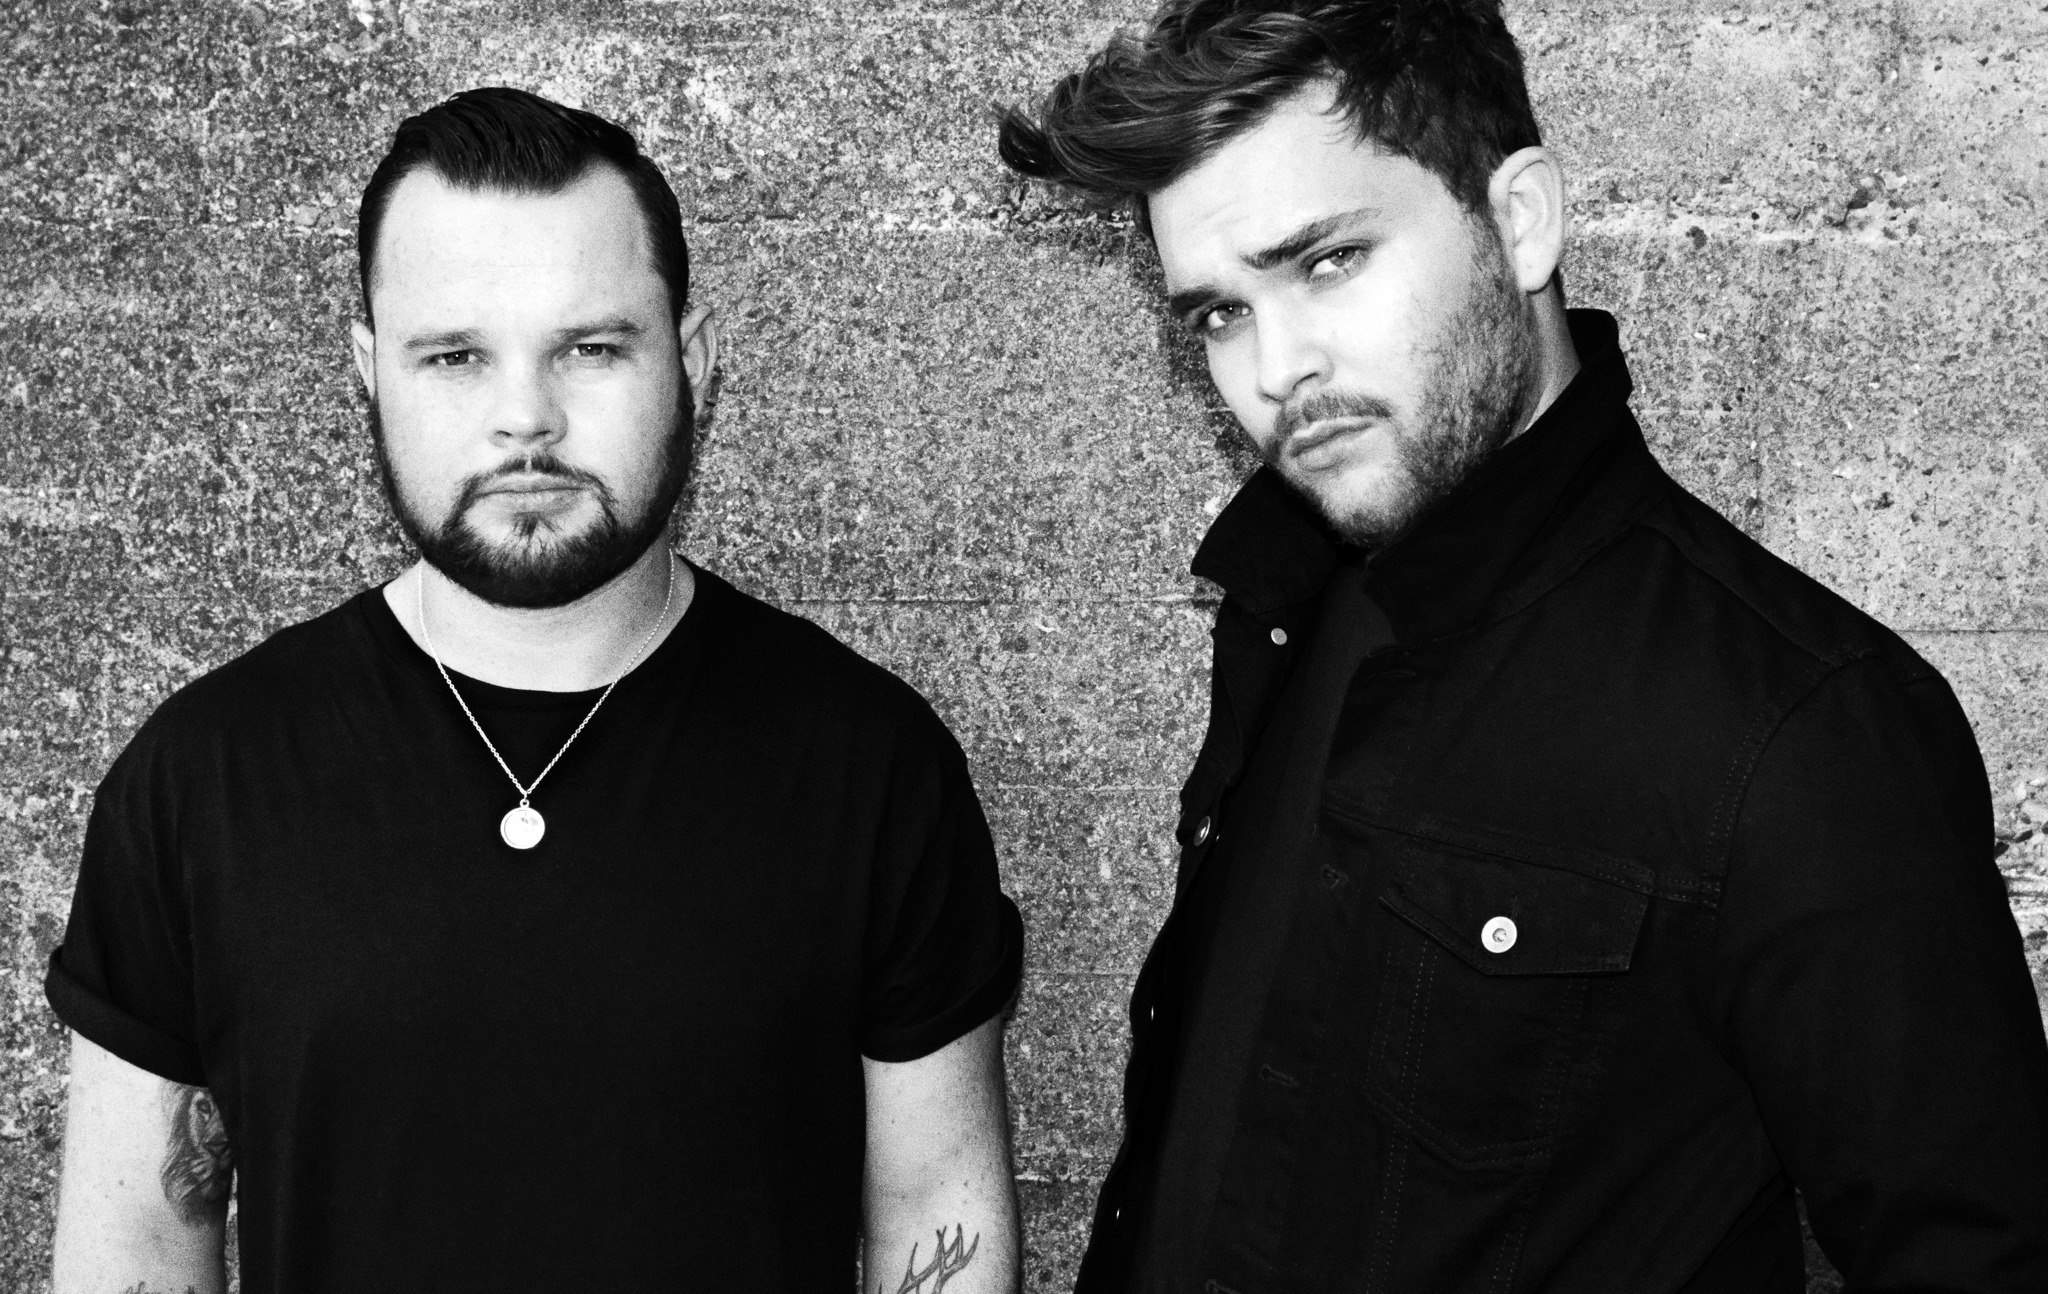 Black and white HD wallpaper featuring two male members of the band tagged as Royal Blood posing against a textured backdrop, perfect for a music-themed desktop background.